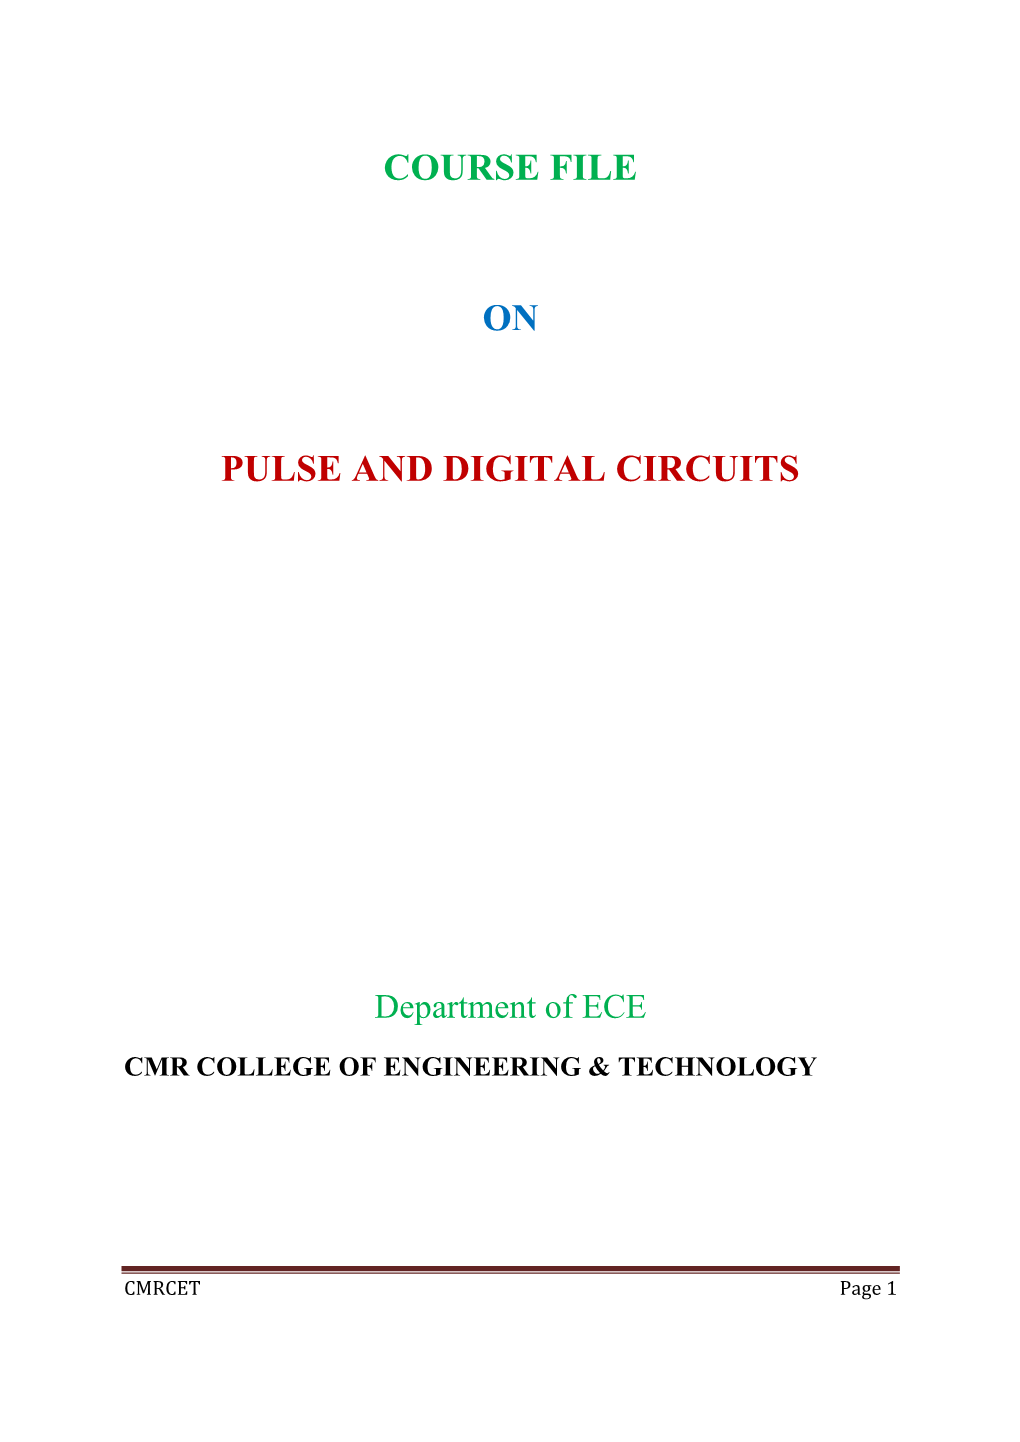 Course File on Pulse and Digital Circuits